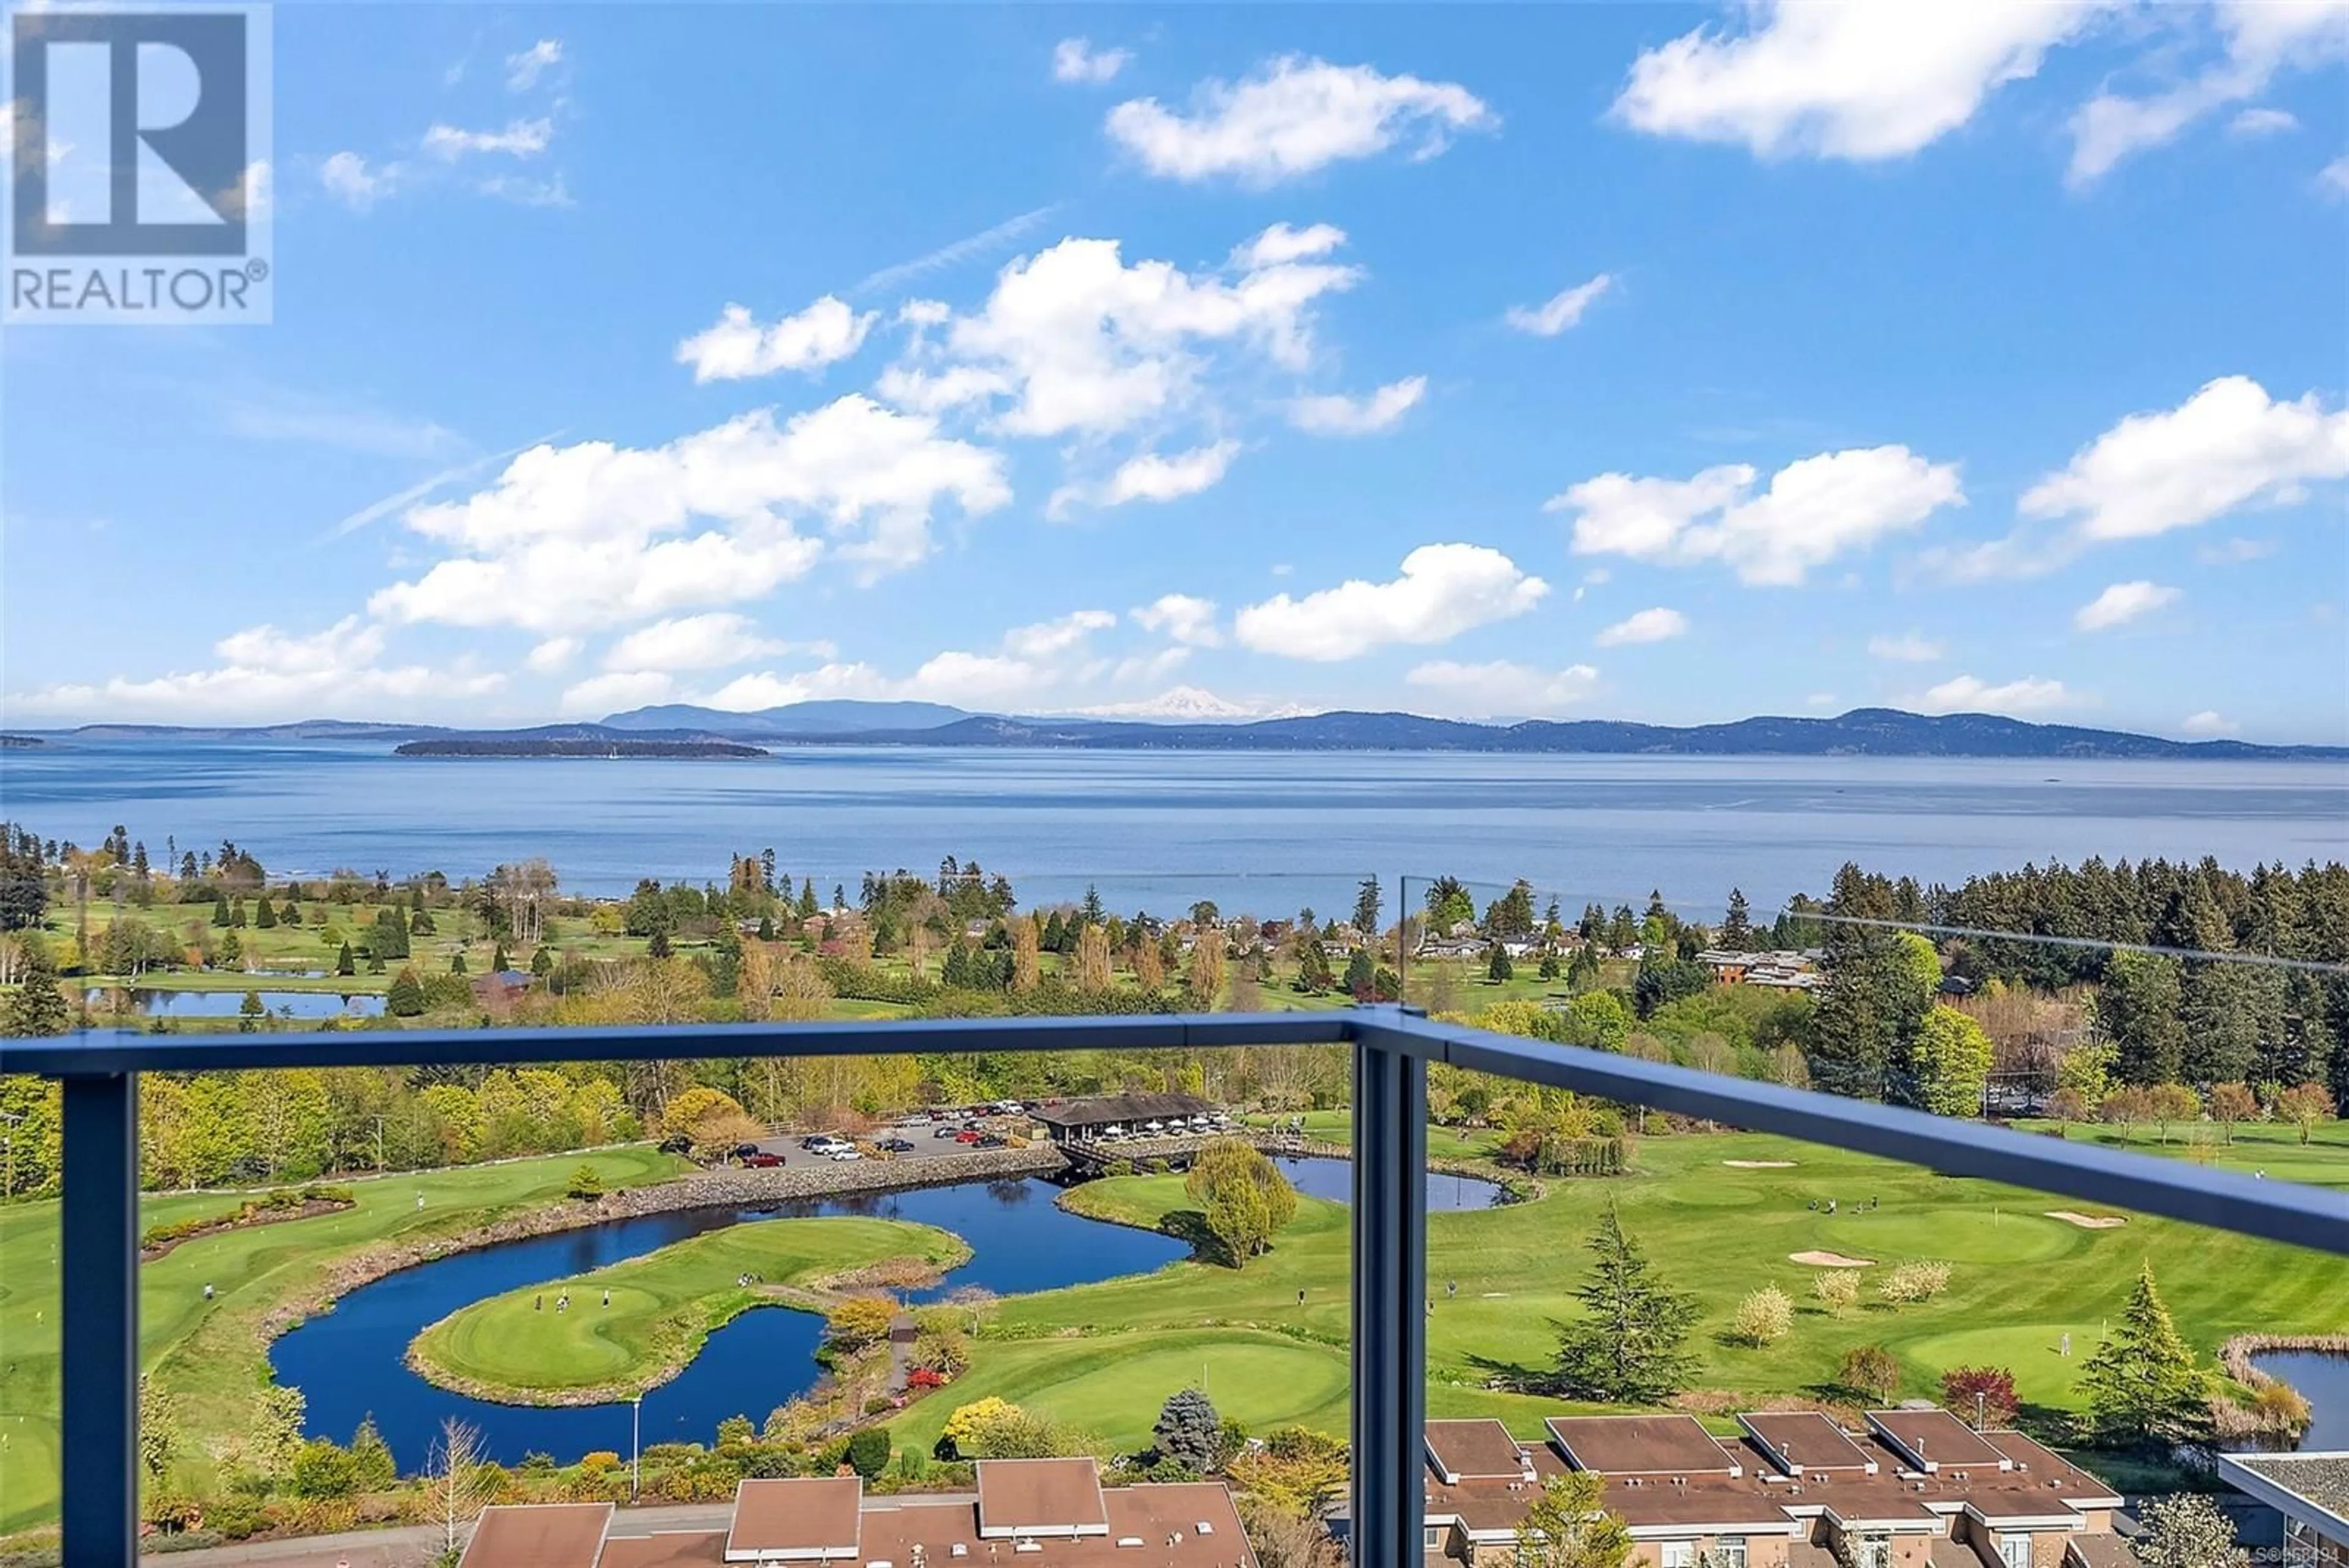 Lakeview for 804 5388 Hill Rise Terr, Saanich British Columbia V8Y3K3